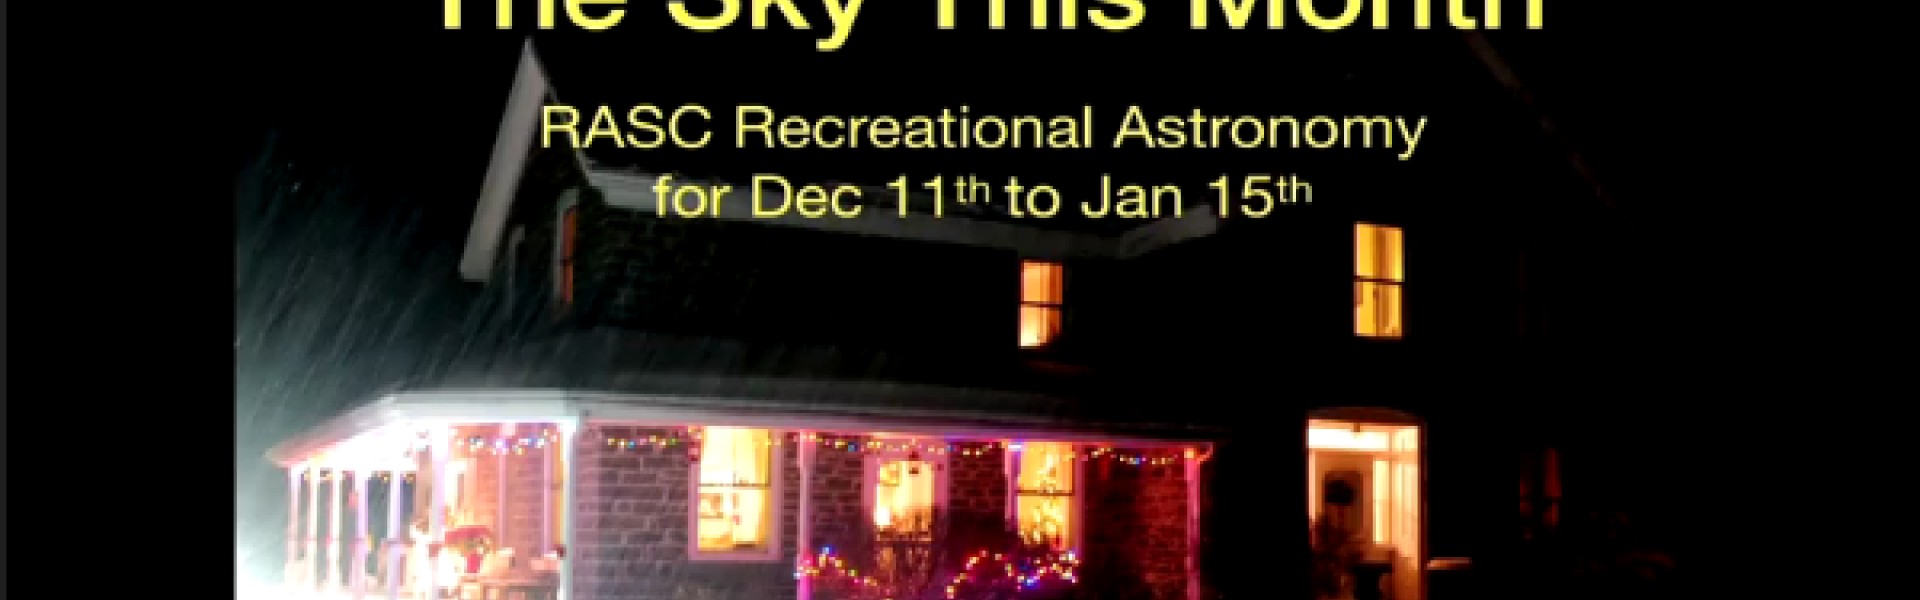 The Sky This Month Holiday 2019-20 Edition